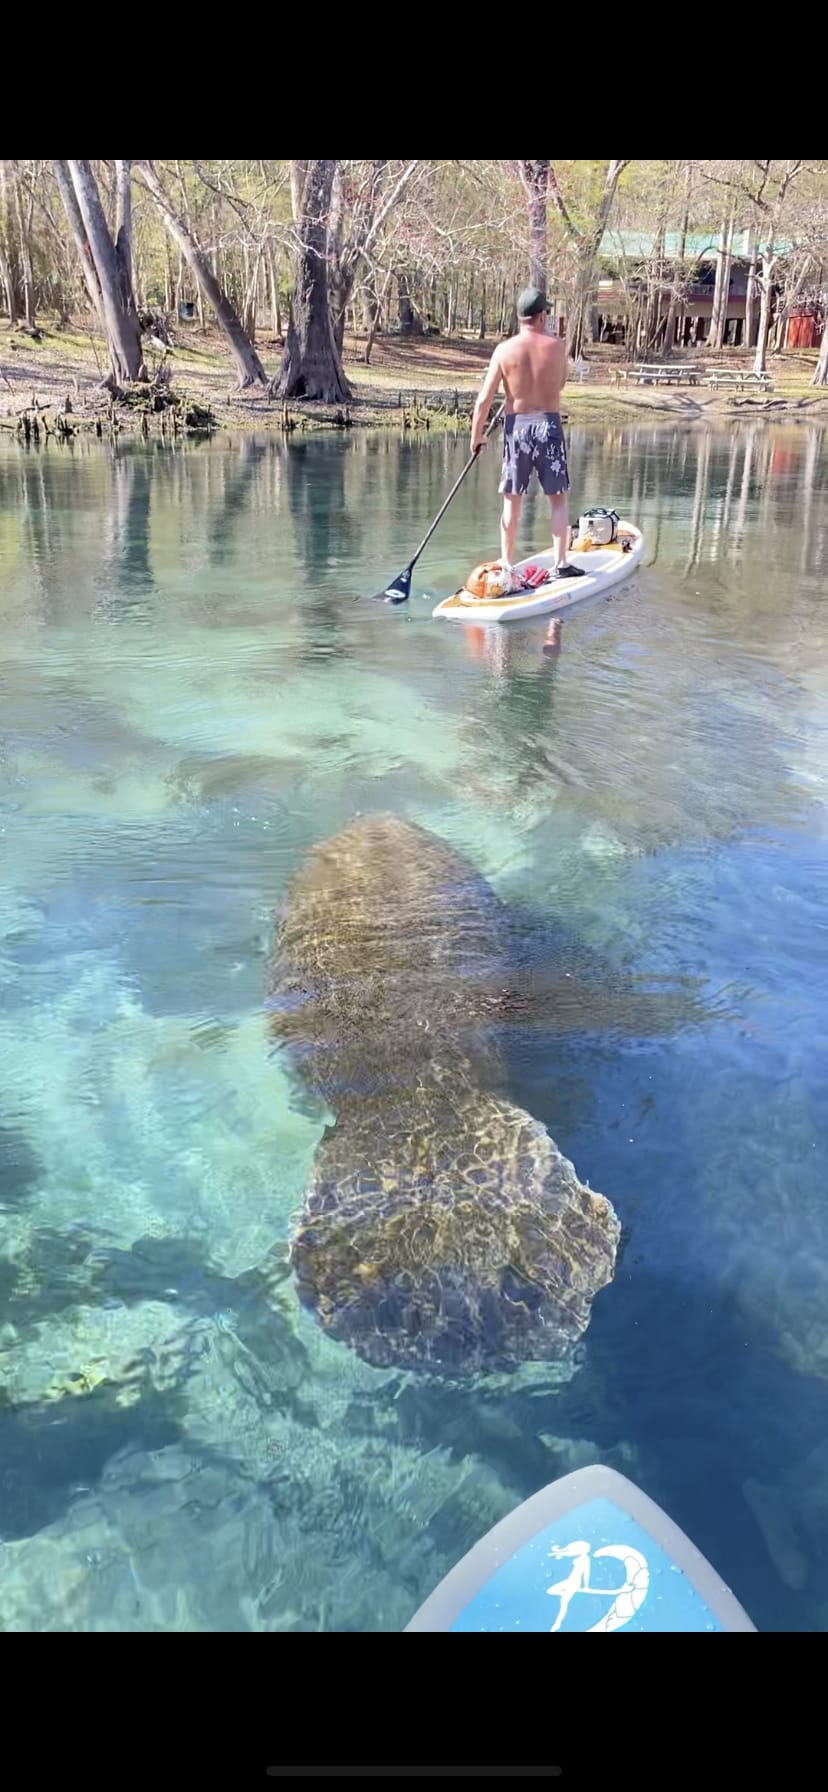 Being followed by a manatee upriver